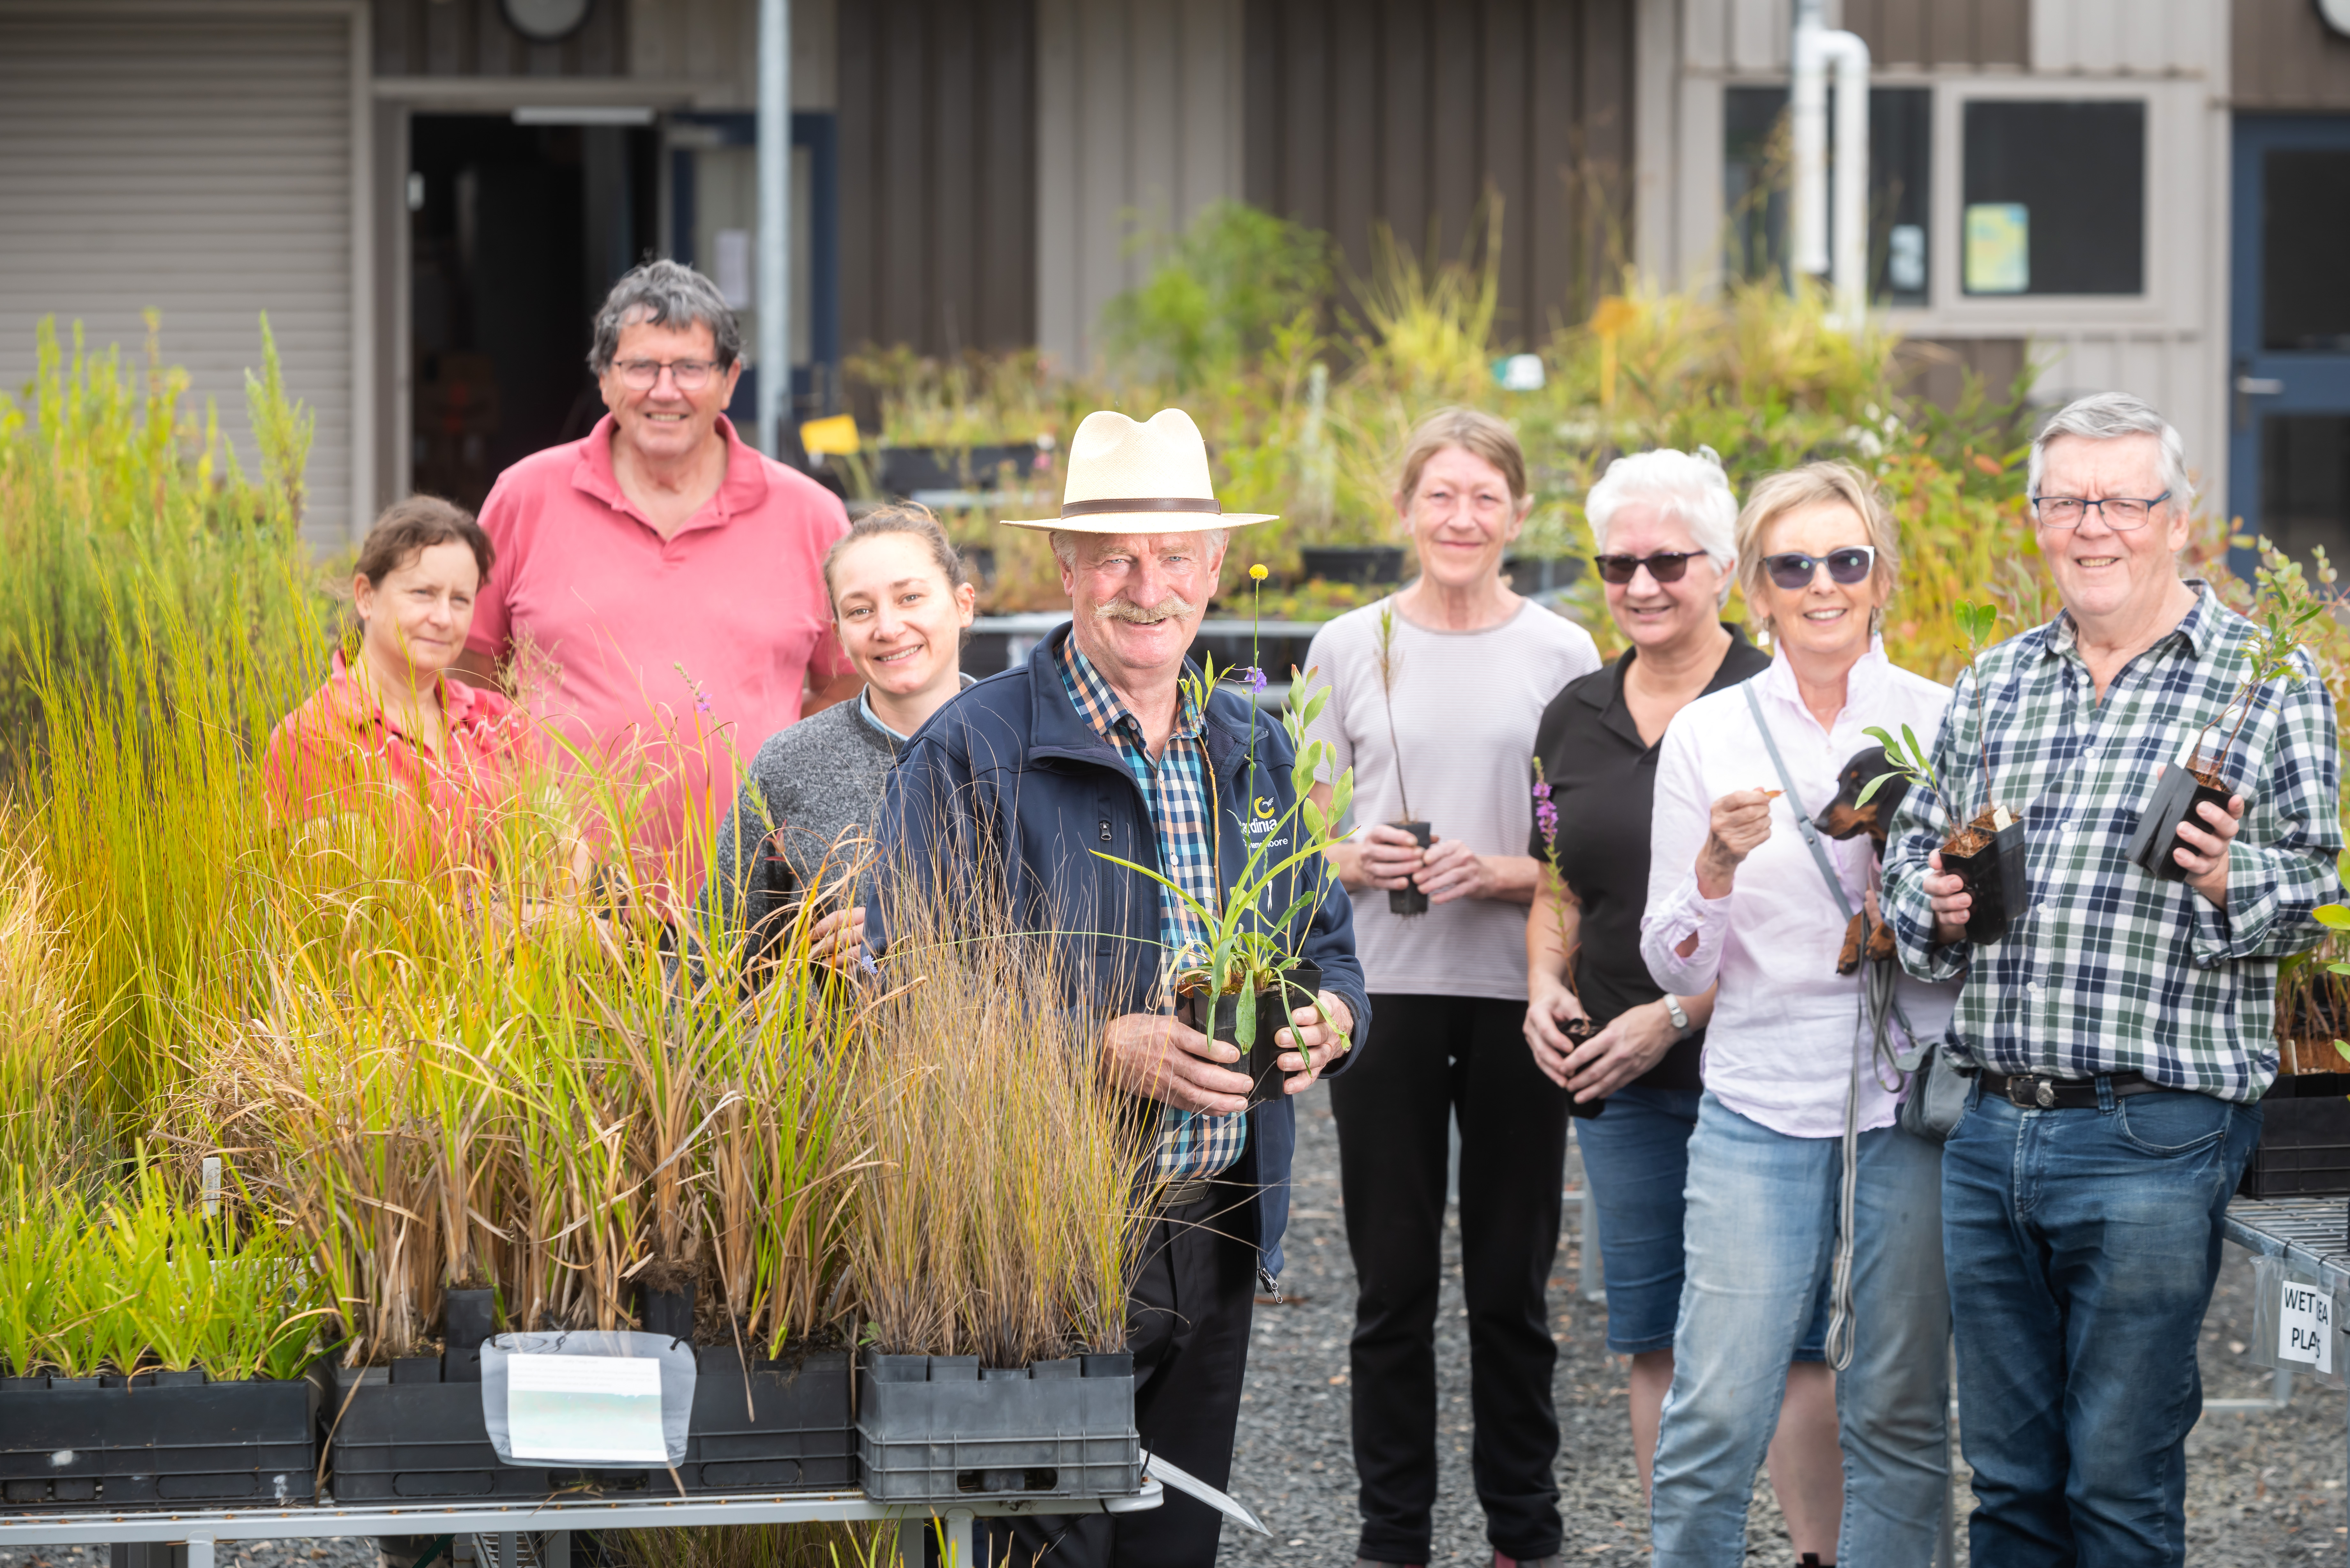 Bunyip Ward Councillor Graeme Moore checks out this year’s free plants with nursery staff and volunteers at the Cardinia Environment Coalition Nursery.